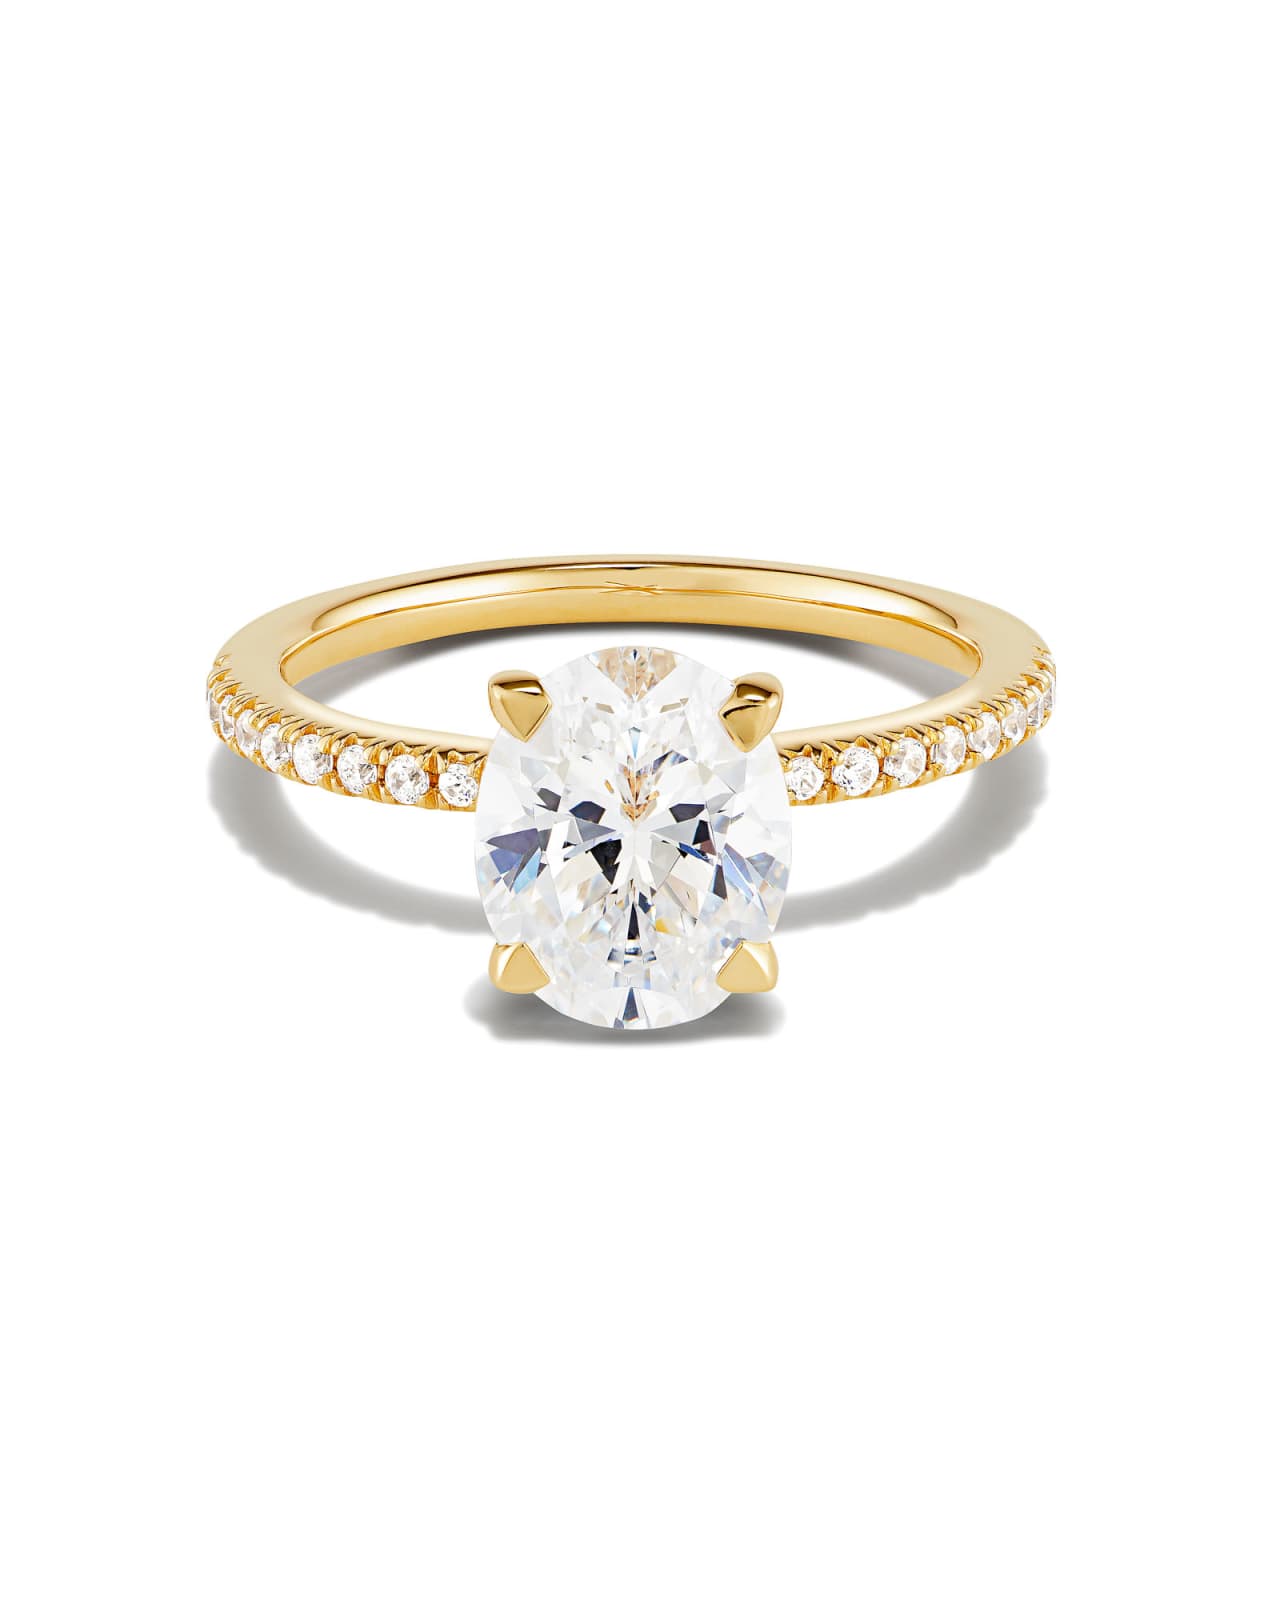 The Signature Oval Engagement Ring | 18K Yellow Gold